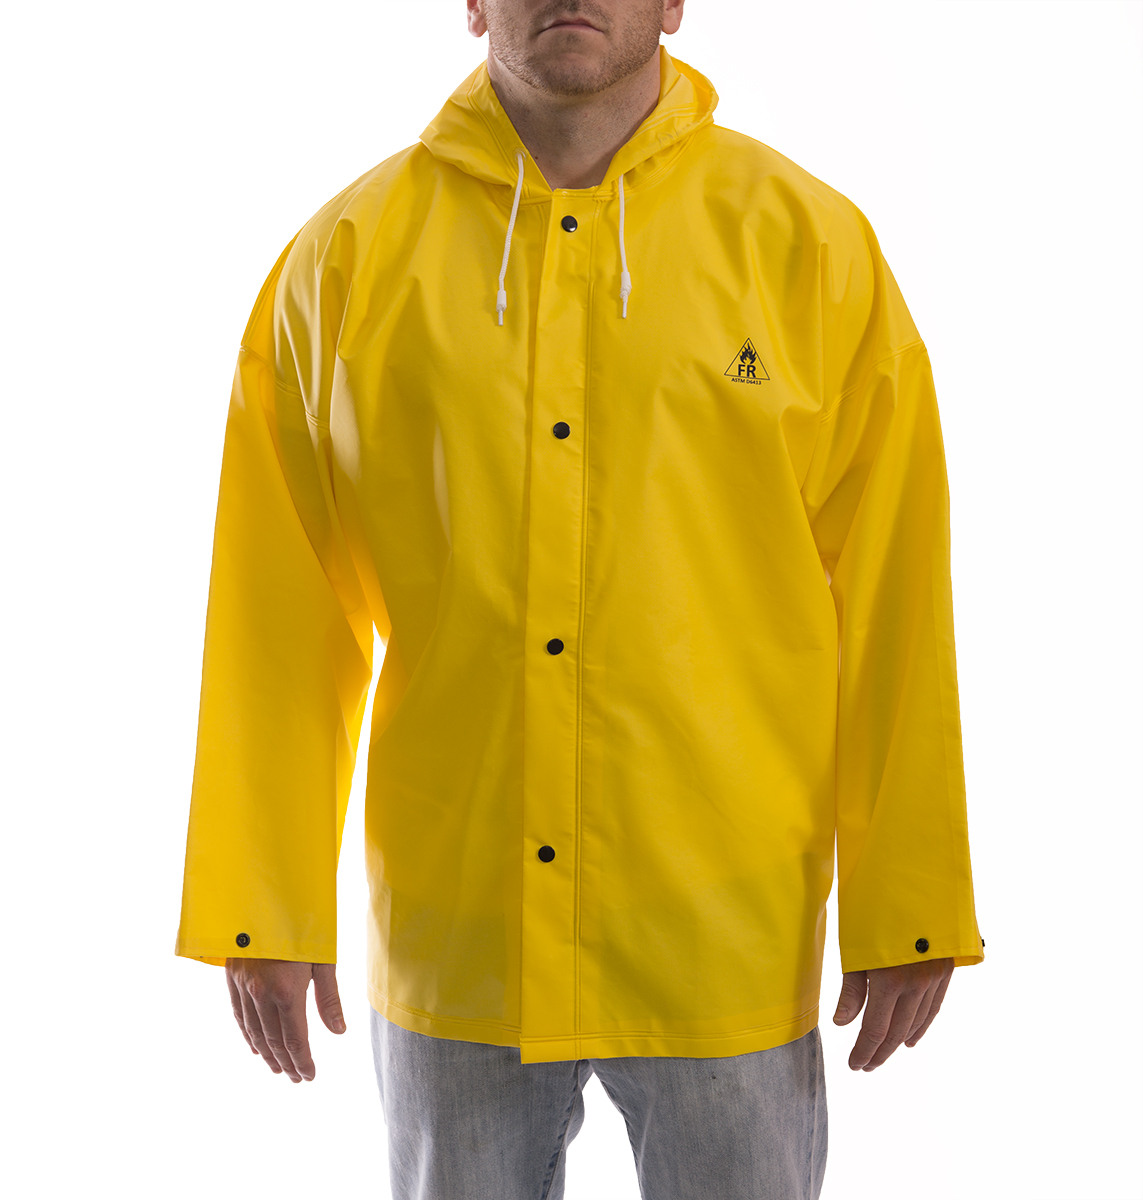 DuraScrim™ Yellow Jacket with Attached Hood - Spill Control